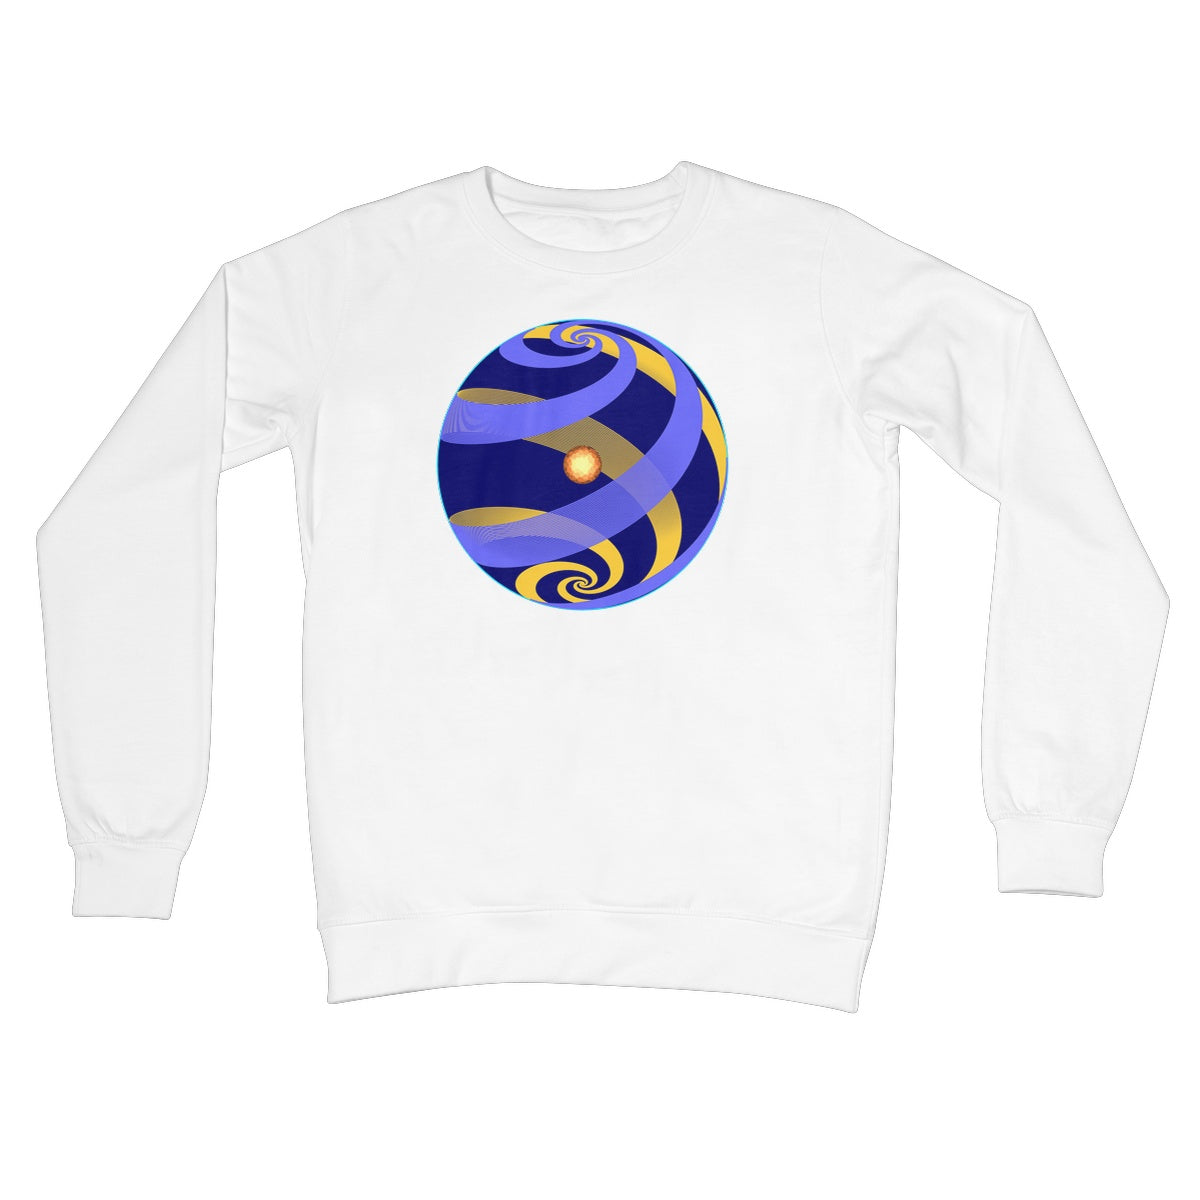 A white sweatshirt with a blue and gold spherical spiral pattern